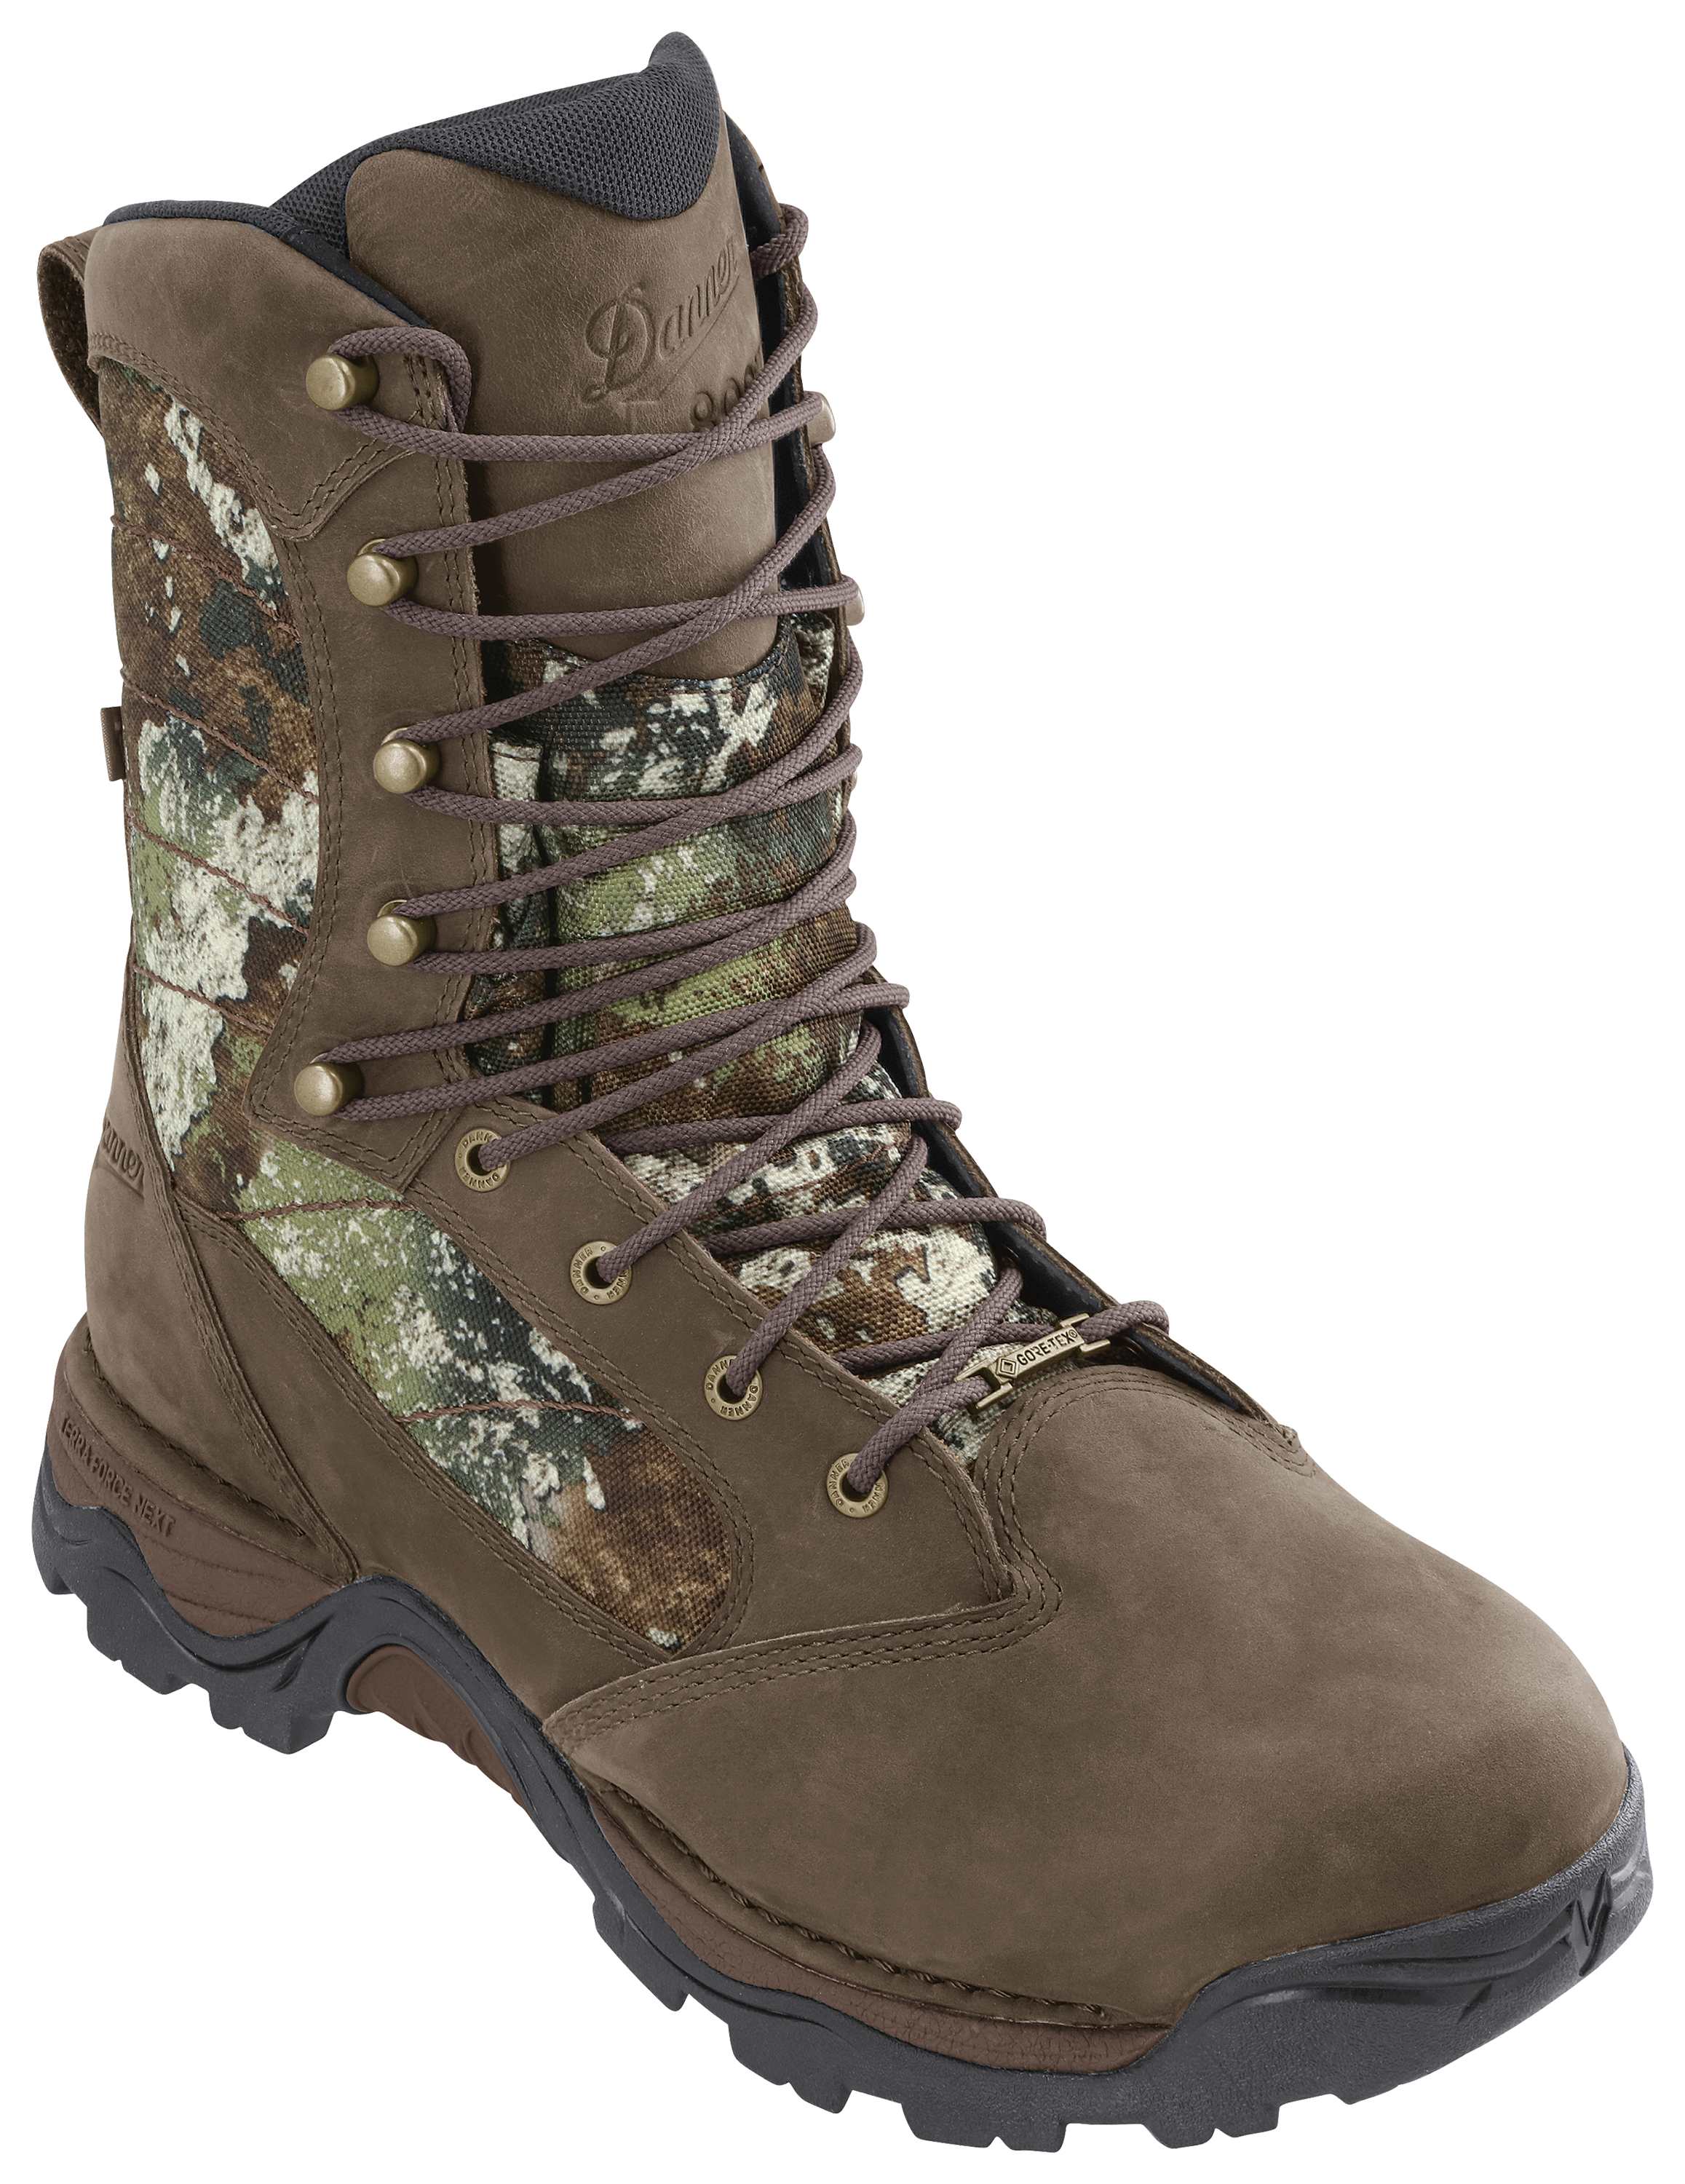 Danner Pronghorn 800 TrueTimber Strata Insulated GORE-TEX Hunting Boots for Men - 9.5W